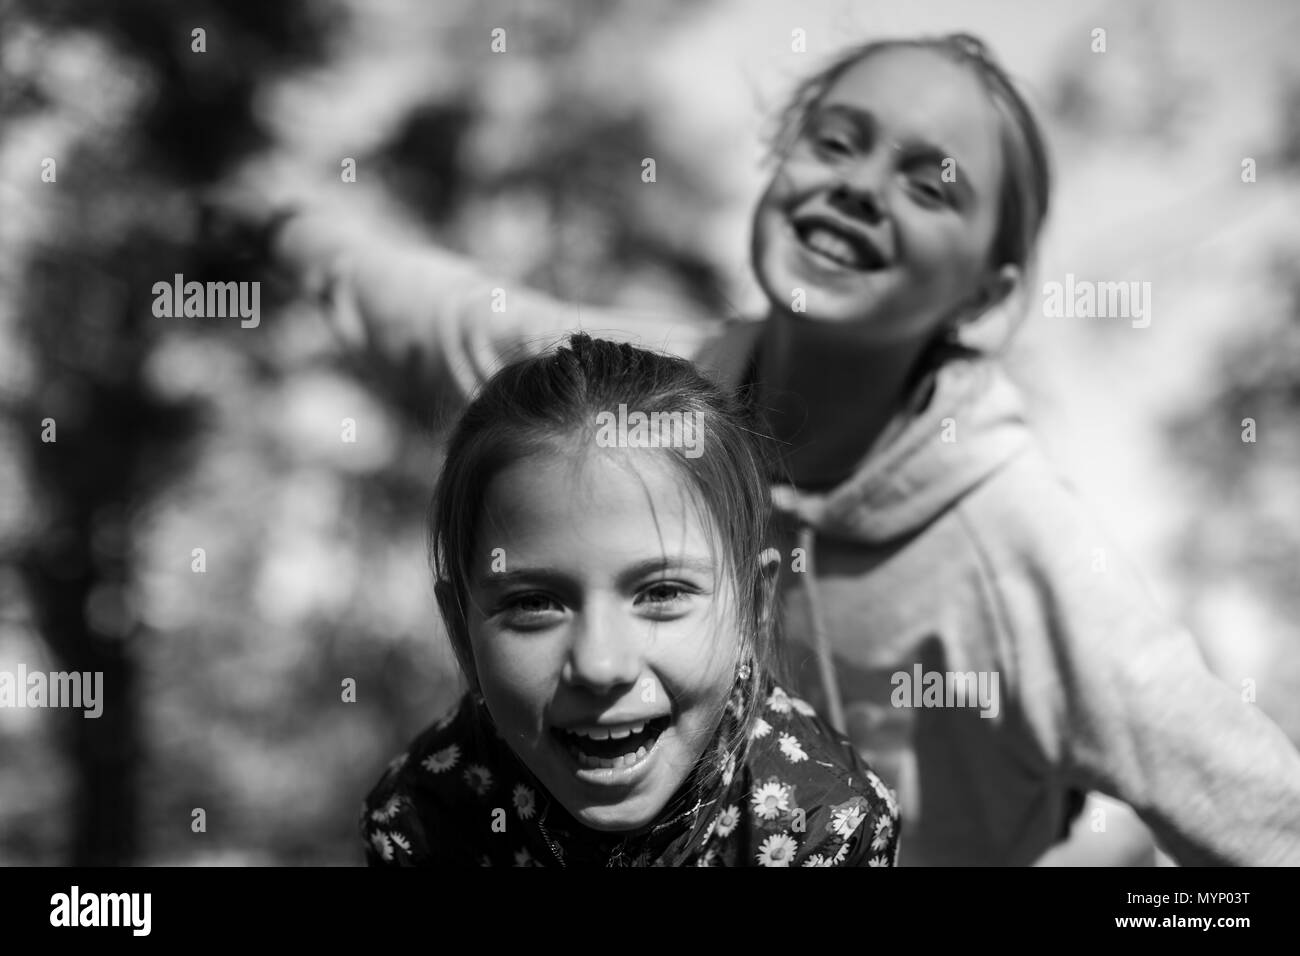 Two girls sisters or girlfriends having fun outdoors. Black and white. Stock Photo